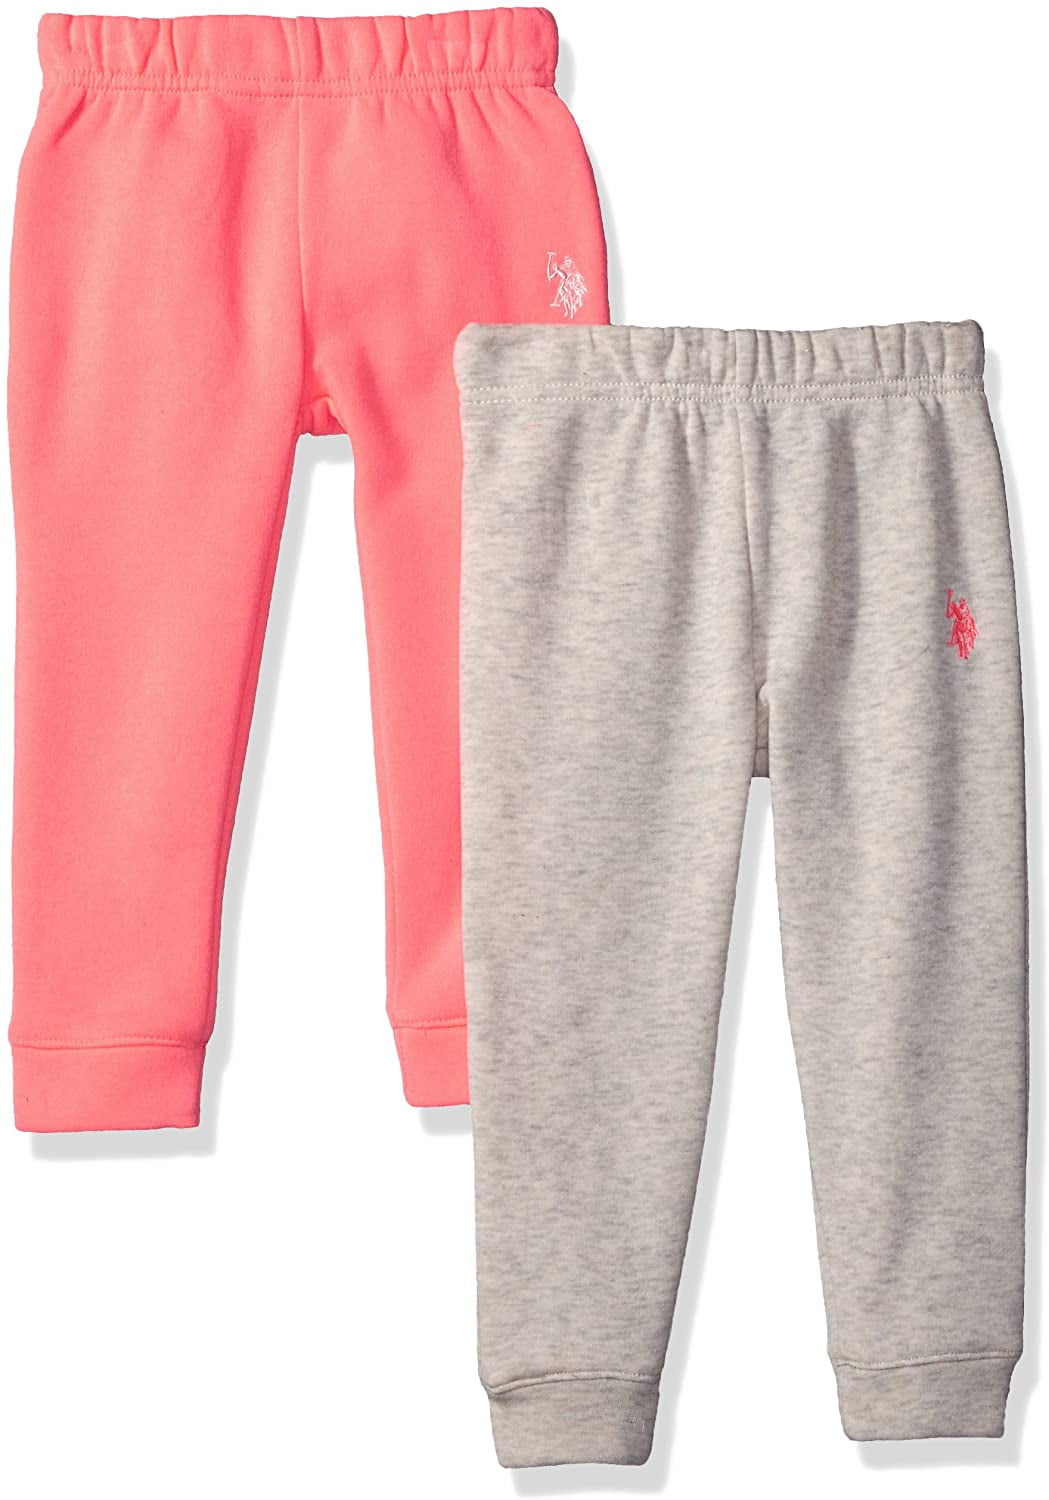 U.S. Polo Assn. Girls' Toddler 2 Jogger, Pack with Light Grey neon ...